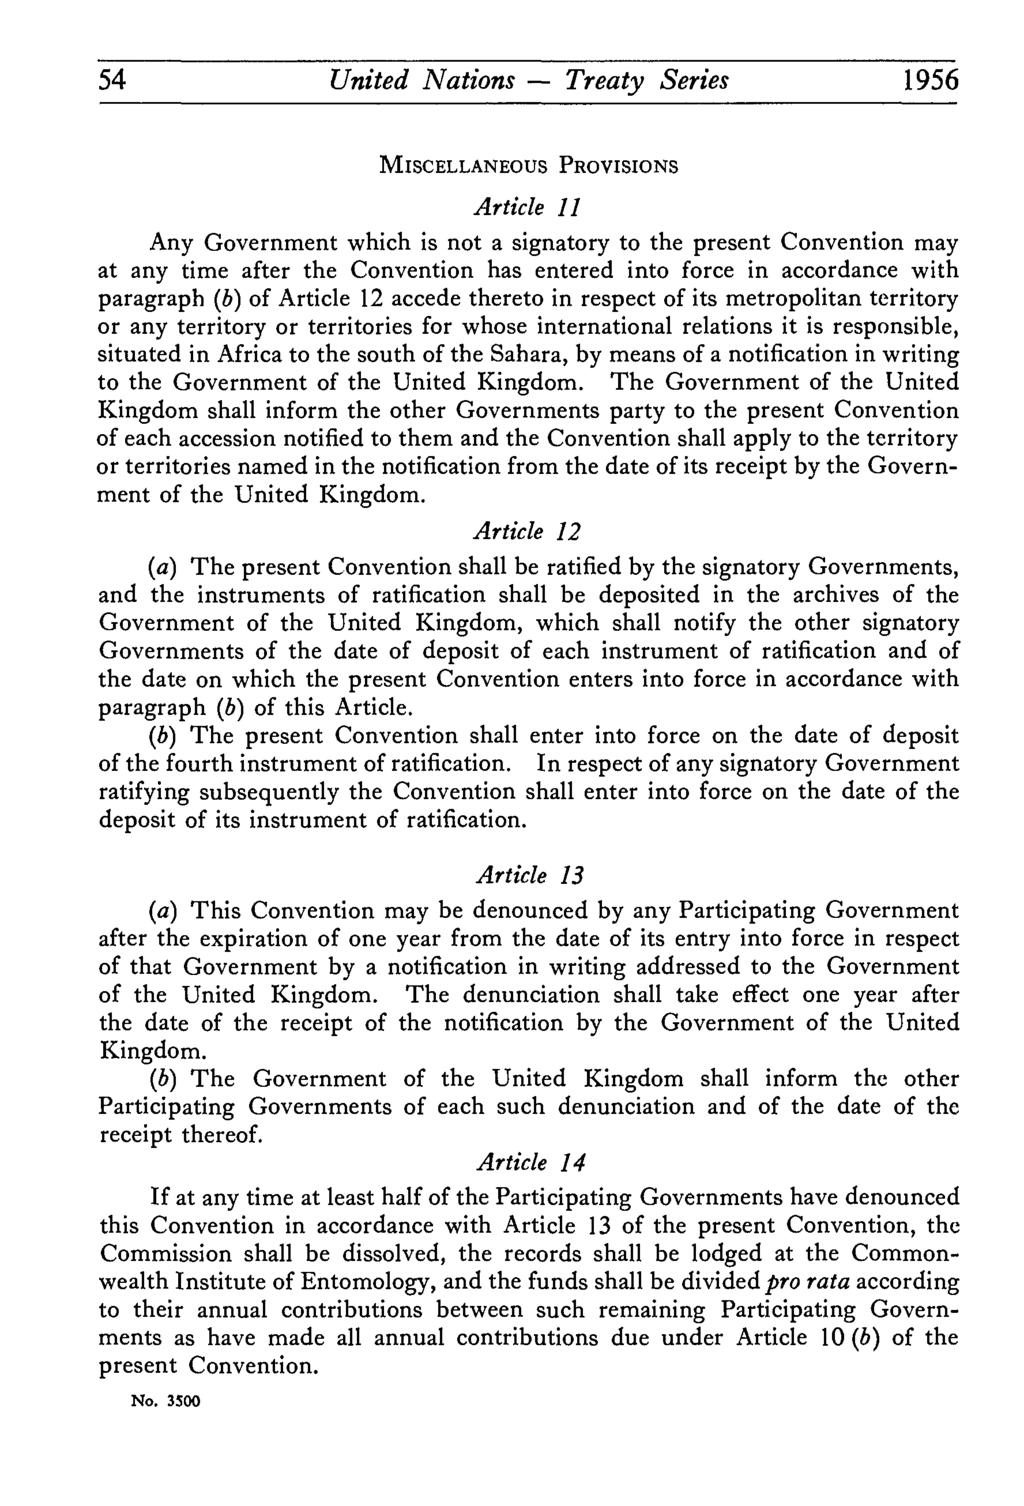 54 United Nations Treaty Series 1956 MISCELLANEOUS PROVISIONS Article 11 Any Government which is not a signatory to the present Convention may at any time after the Convention has entered into force